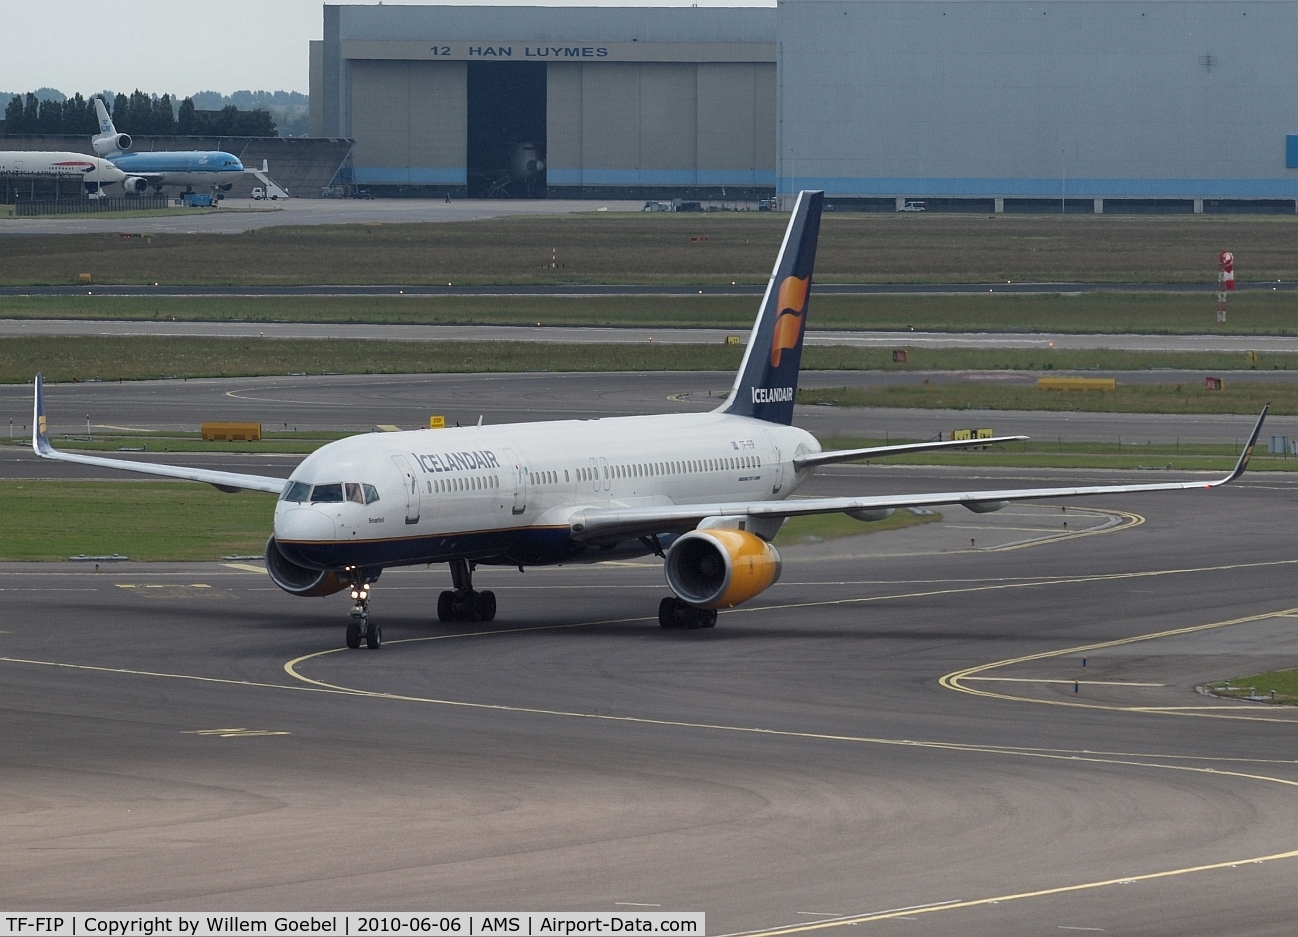 TF-FIP, 2000 Boeing 757-208 C/N 30423, Arrival on Amsterdam airport  and taxi to the gate